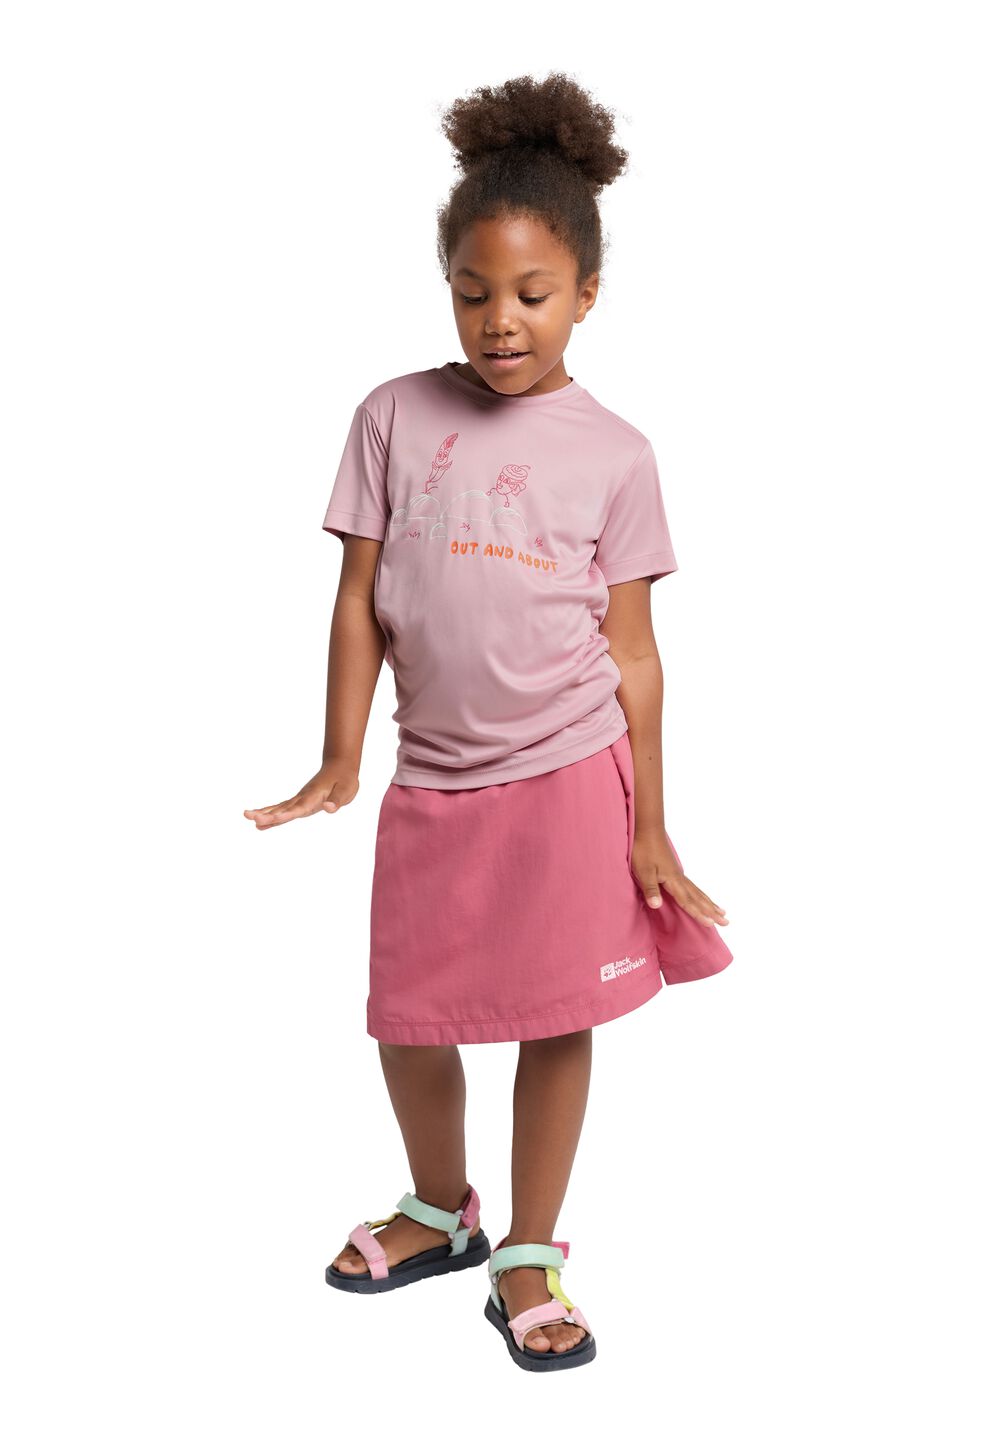 Jack Wolfskin OUT AND About T-Shirt Kids Functioneel shirt Kinderen 176 water lily water lily